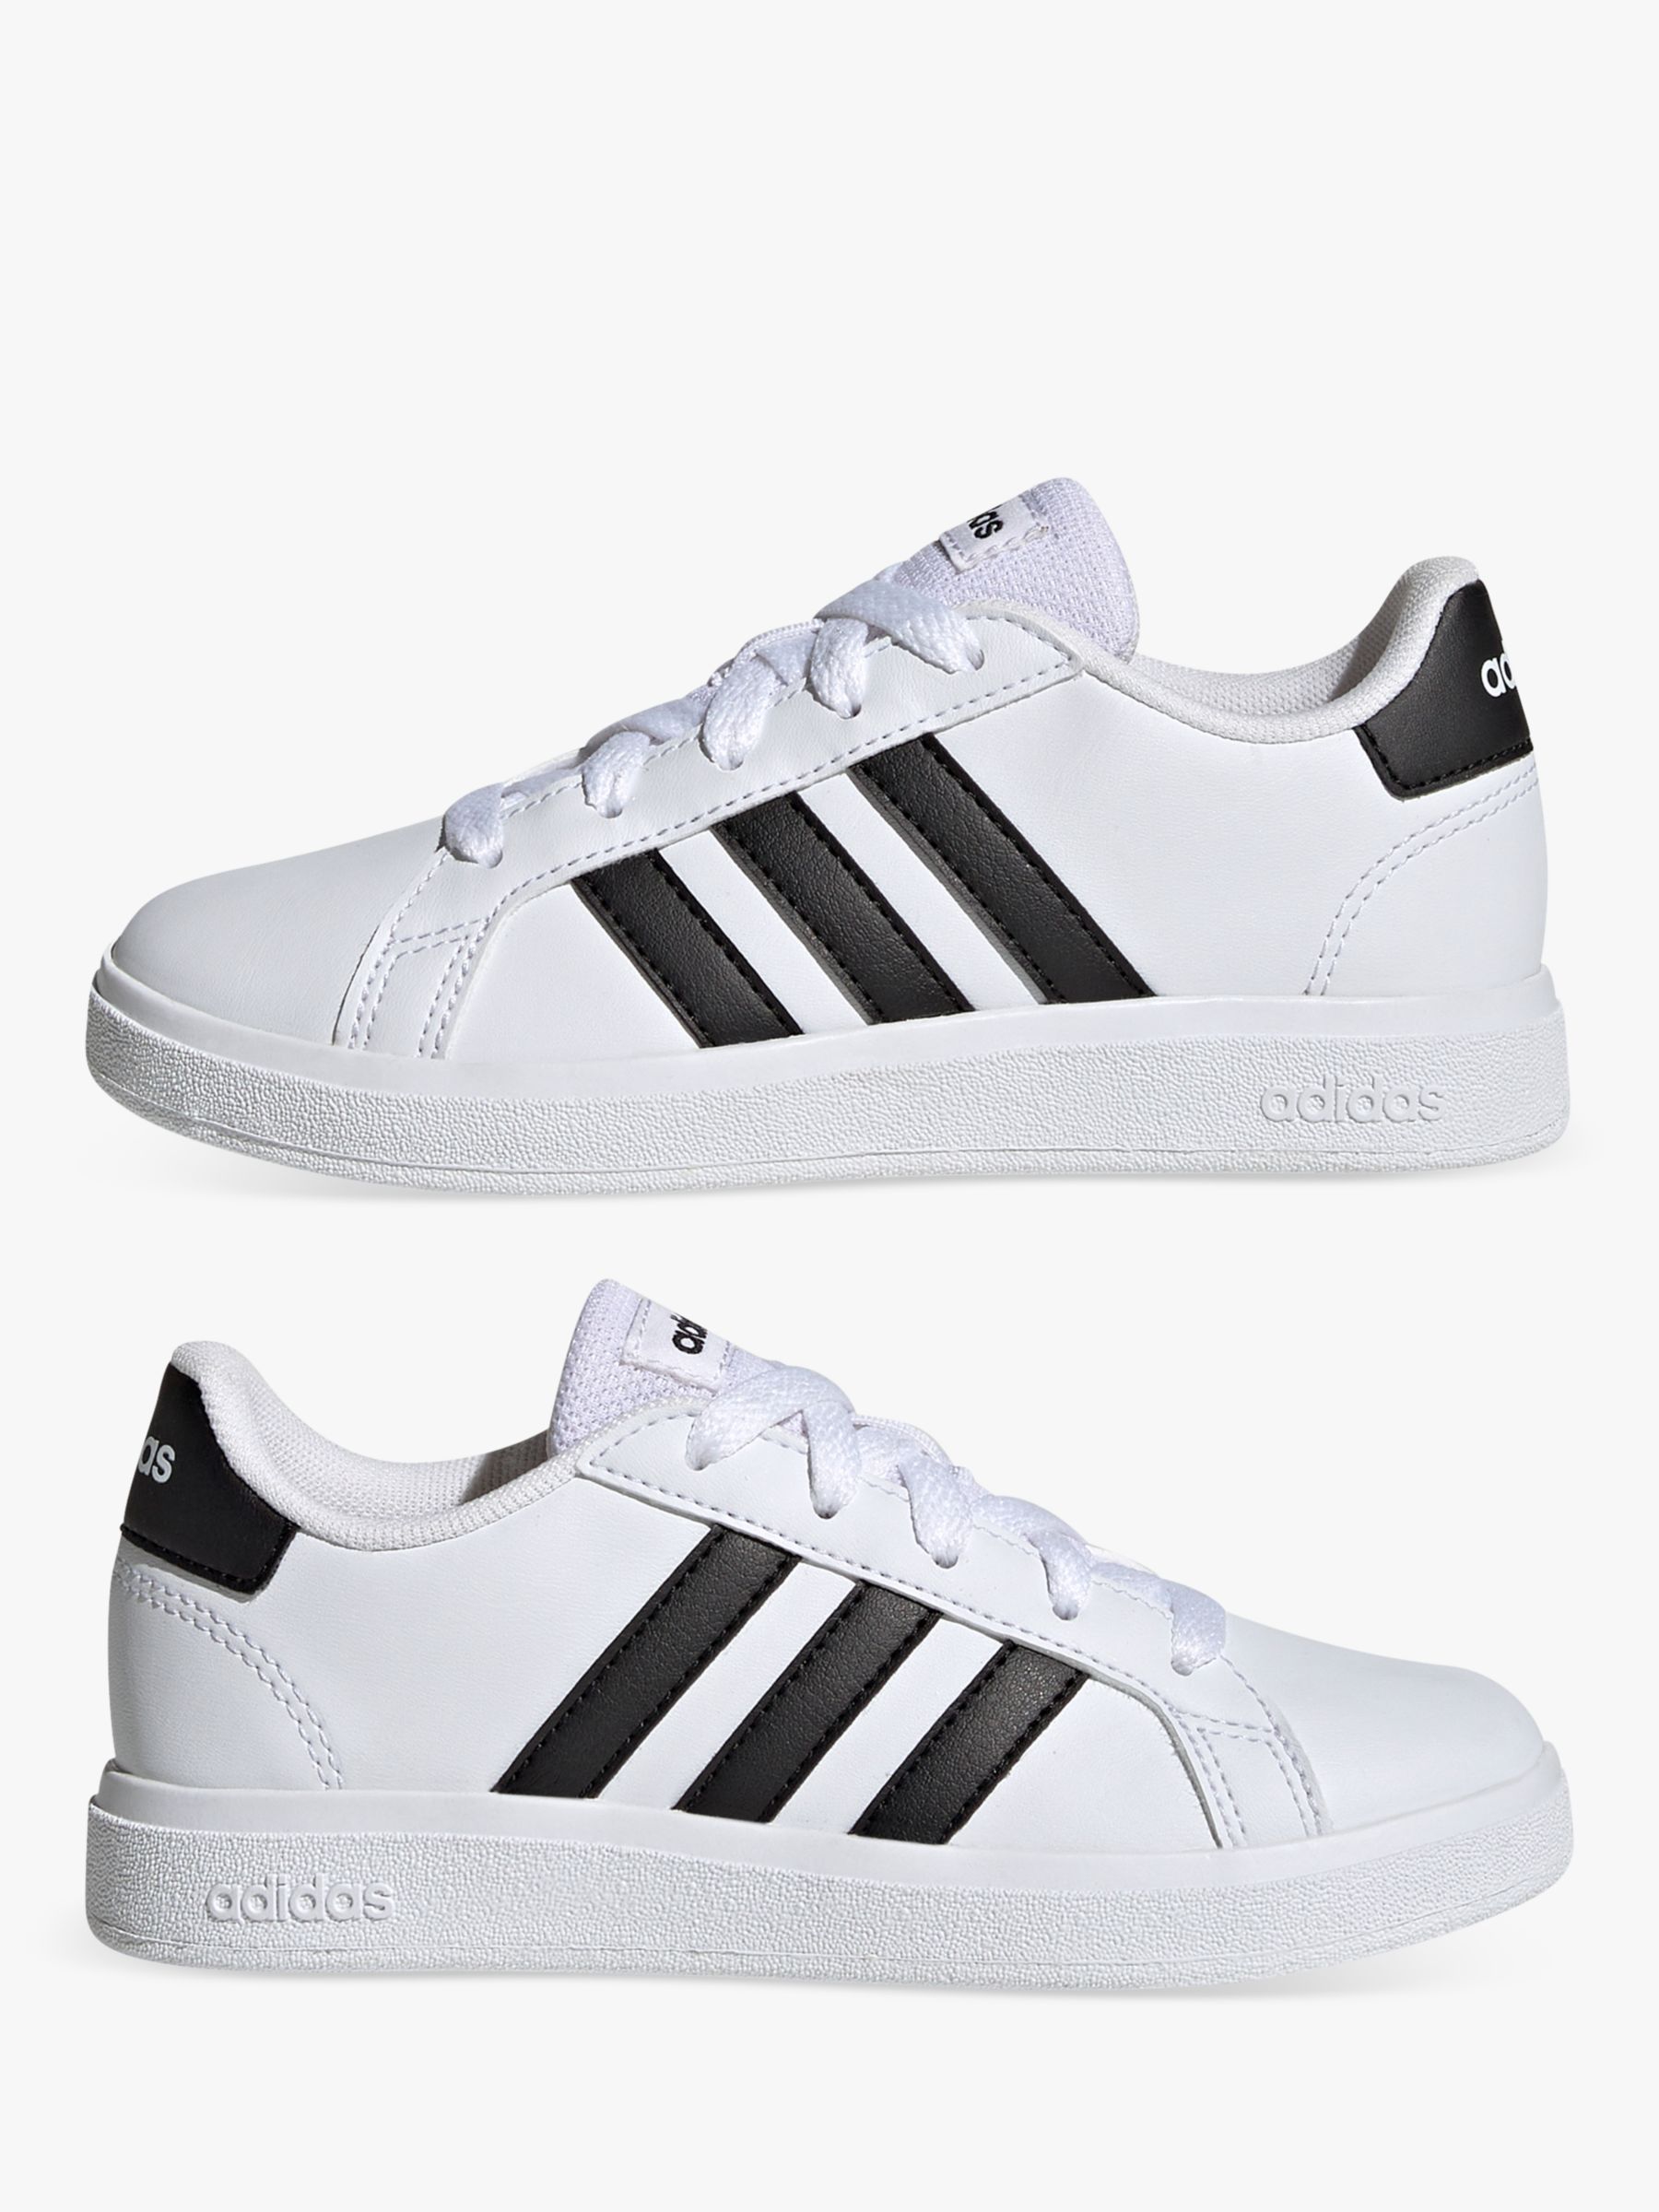 adidas Kids' Grand Court 2.0 Trainers, White/Black at John Lewis & Partners